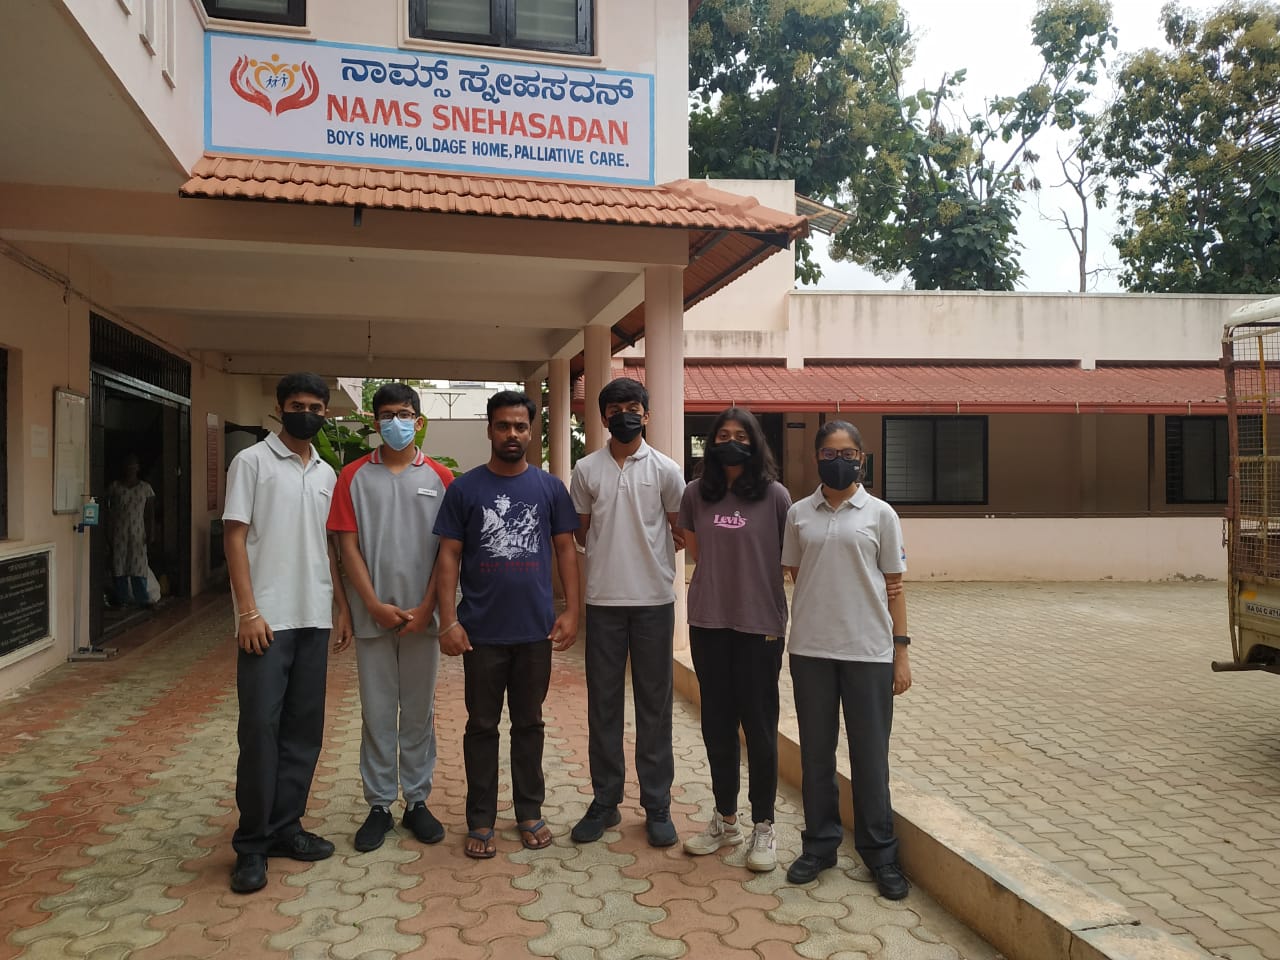 The students of 10 IGCSE had an opportunity to visit the orphanages and donate the contributions on 24<sup>th</sup> August 2022. They were accompanied by <strong>Ms. Shilpa Bhat</strong> and <strong>Ms. Bhuwaneshwari</strong>. The experience was an eye-opener for the students as it made them realize the importance of charity and generosity.